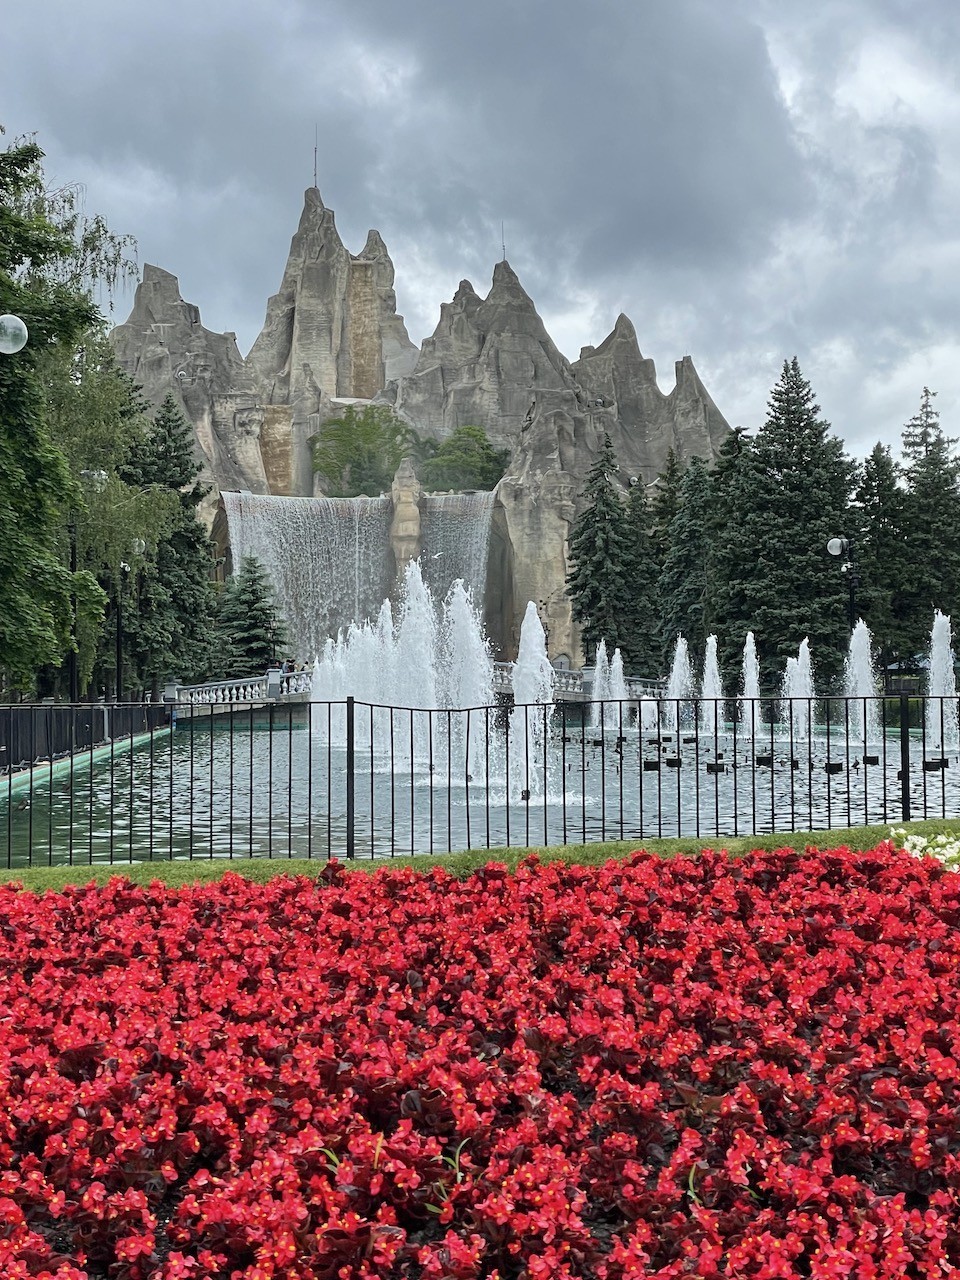 Canada's Wonderland Entrance Vaughn Ontario - As soon as visitors walk through the front gate at Canada's Wonderland, they are welcomed with this the iconic waterfall, fountain and flowerbed view in Vaughan, Ontario. 